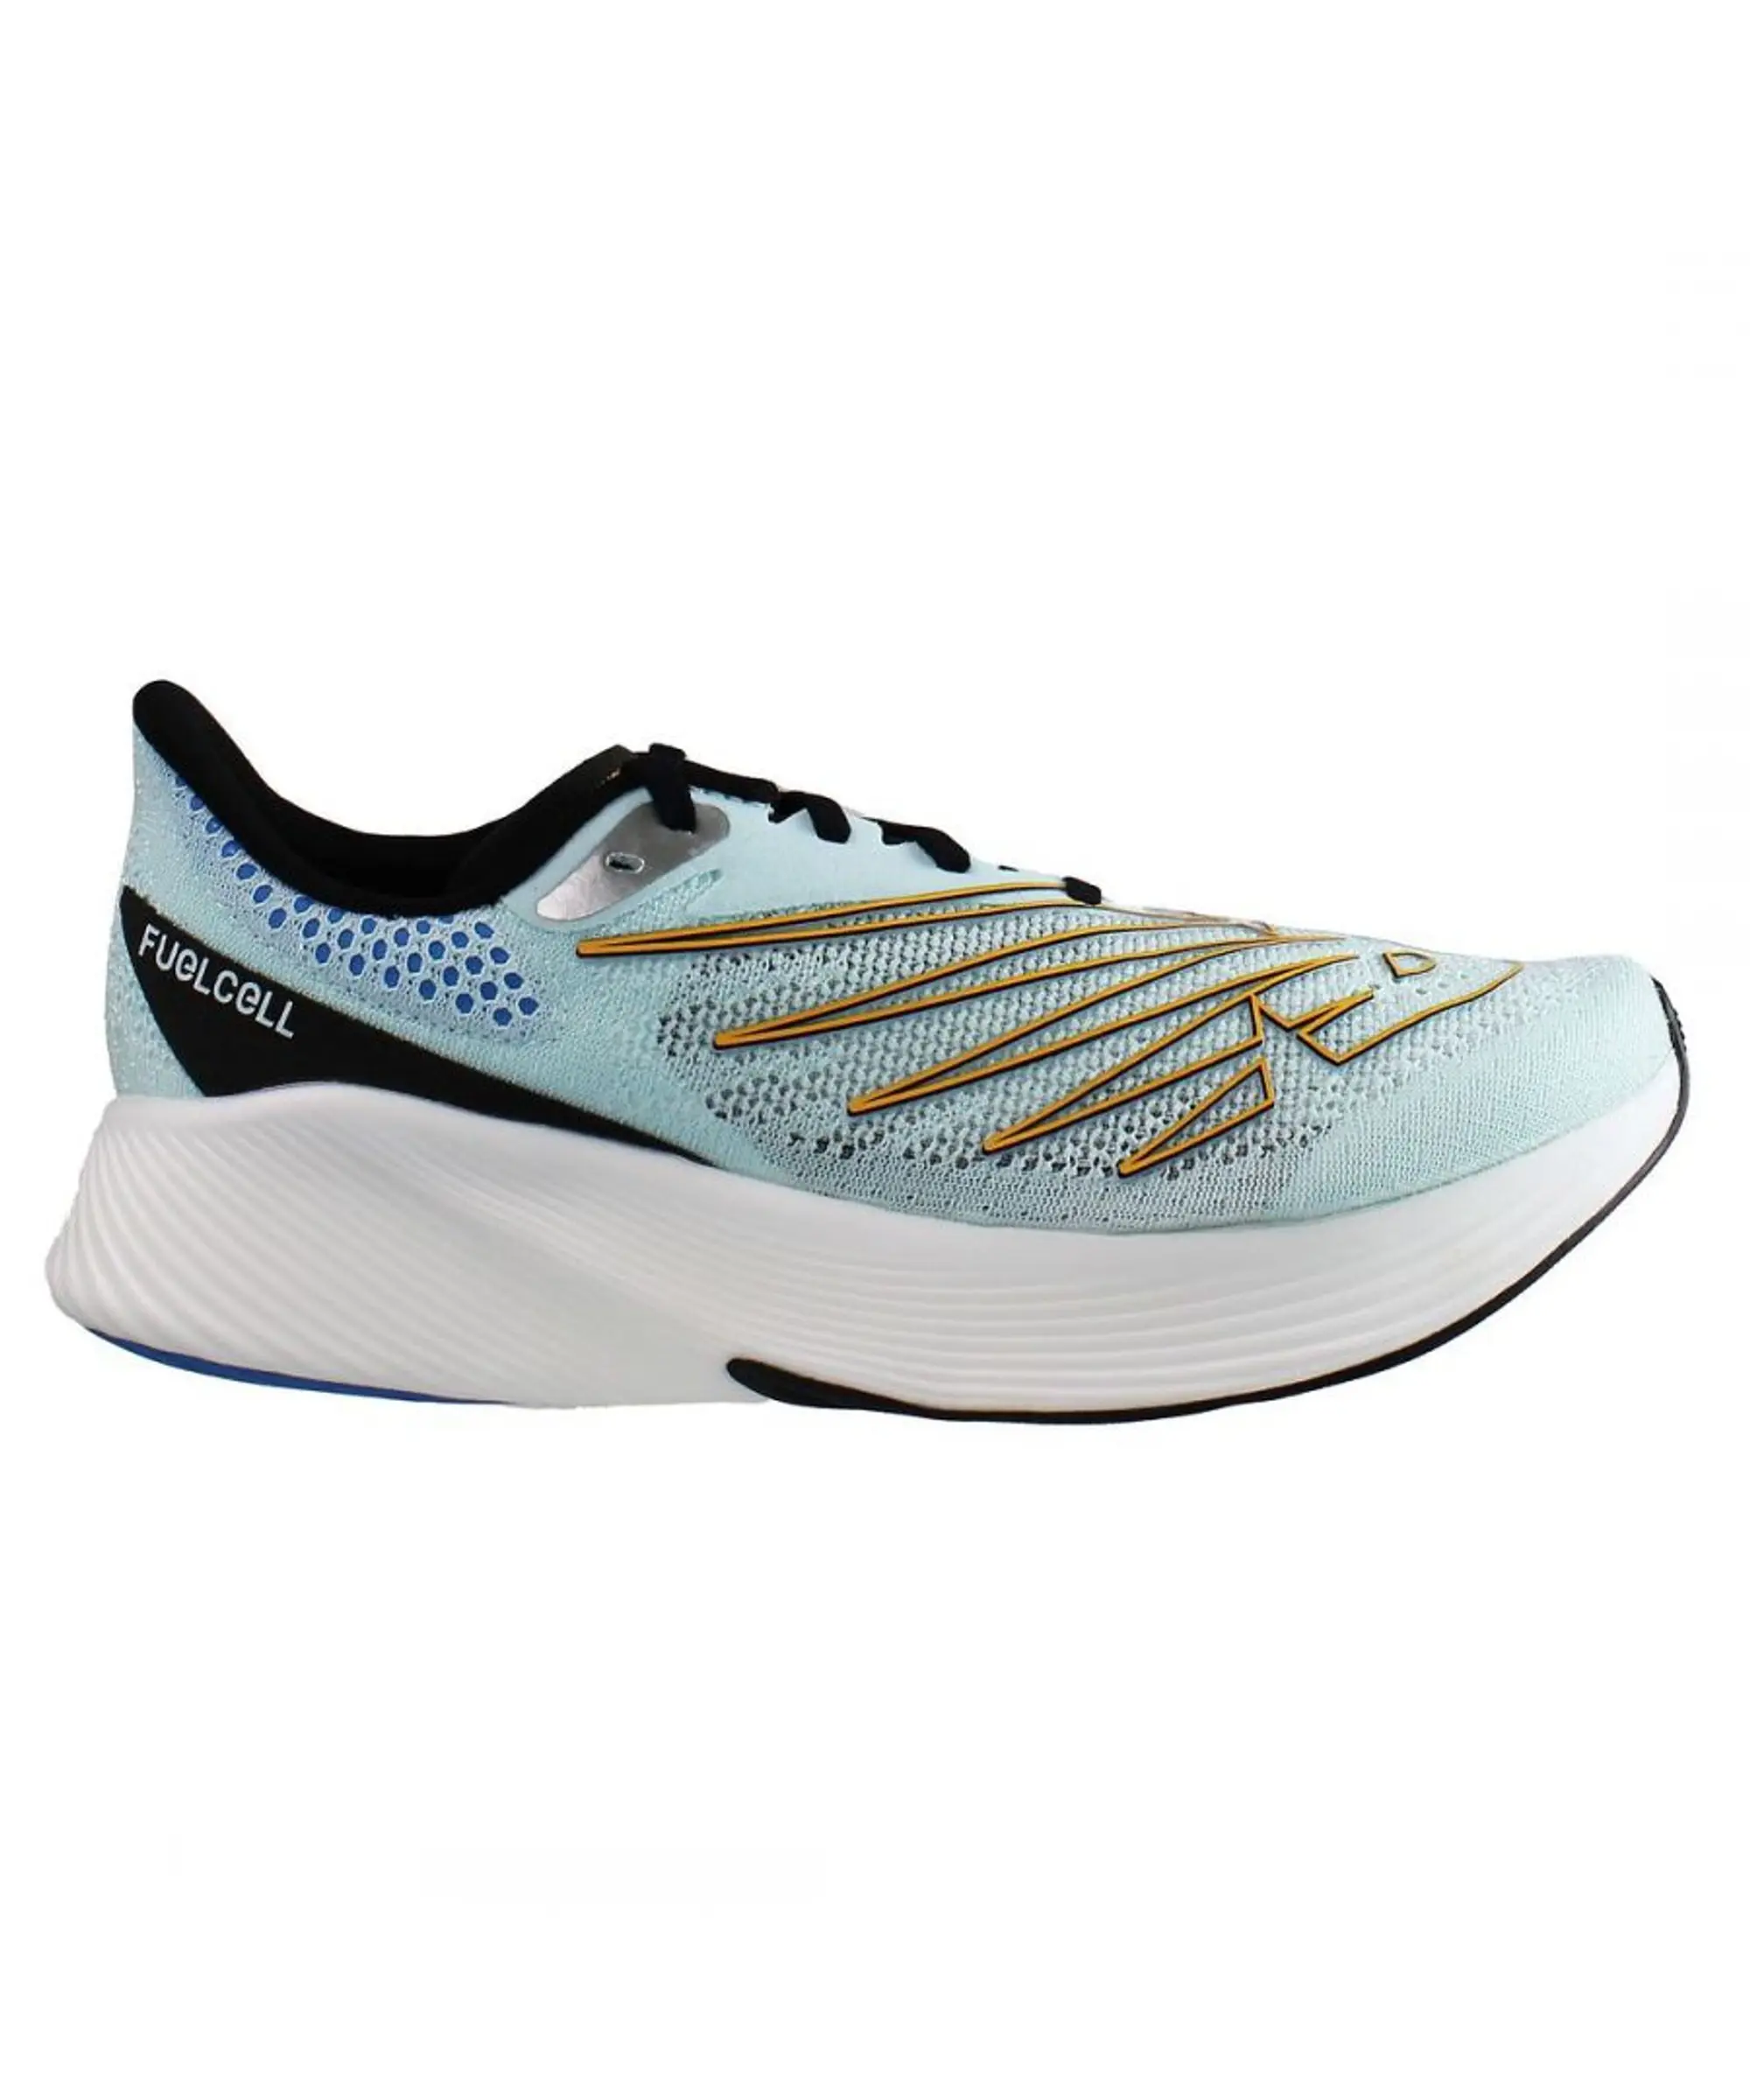 New Balance FuelCell RC Elite v2 Blue Mens Trainers